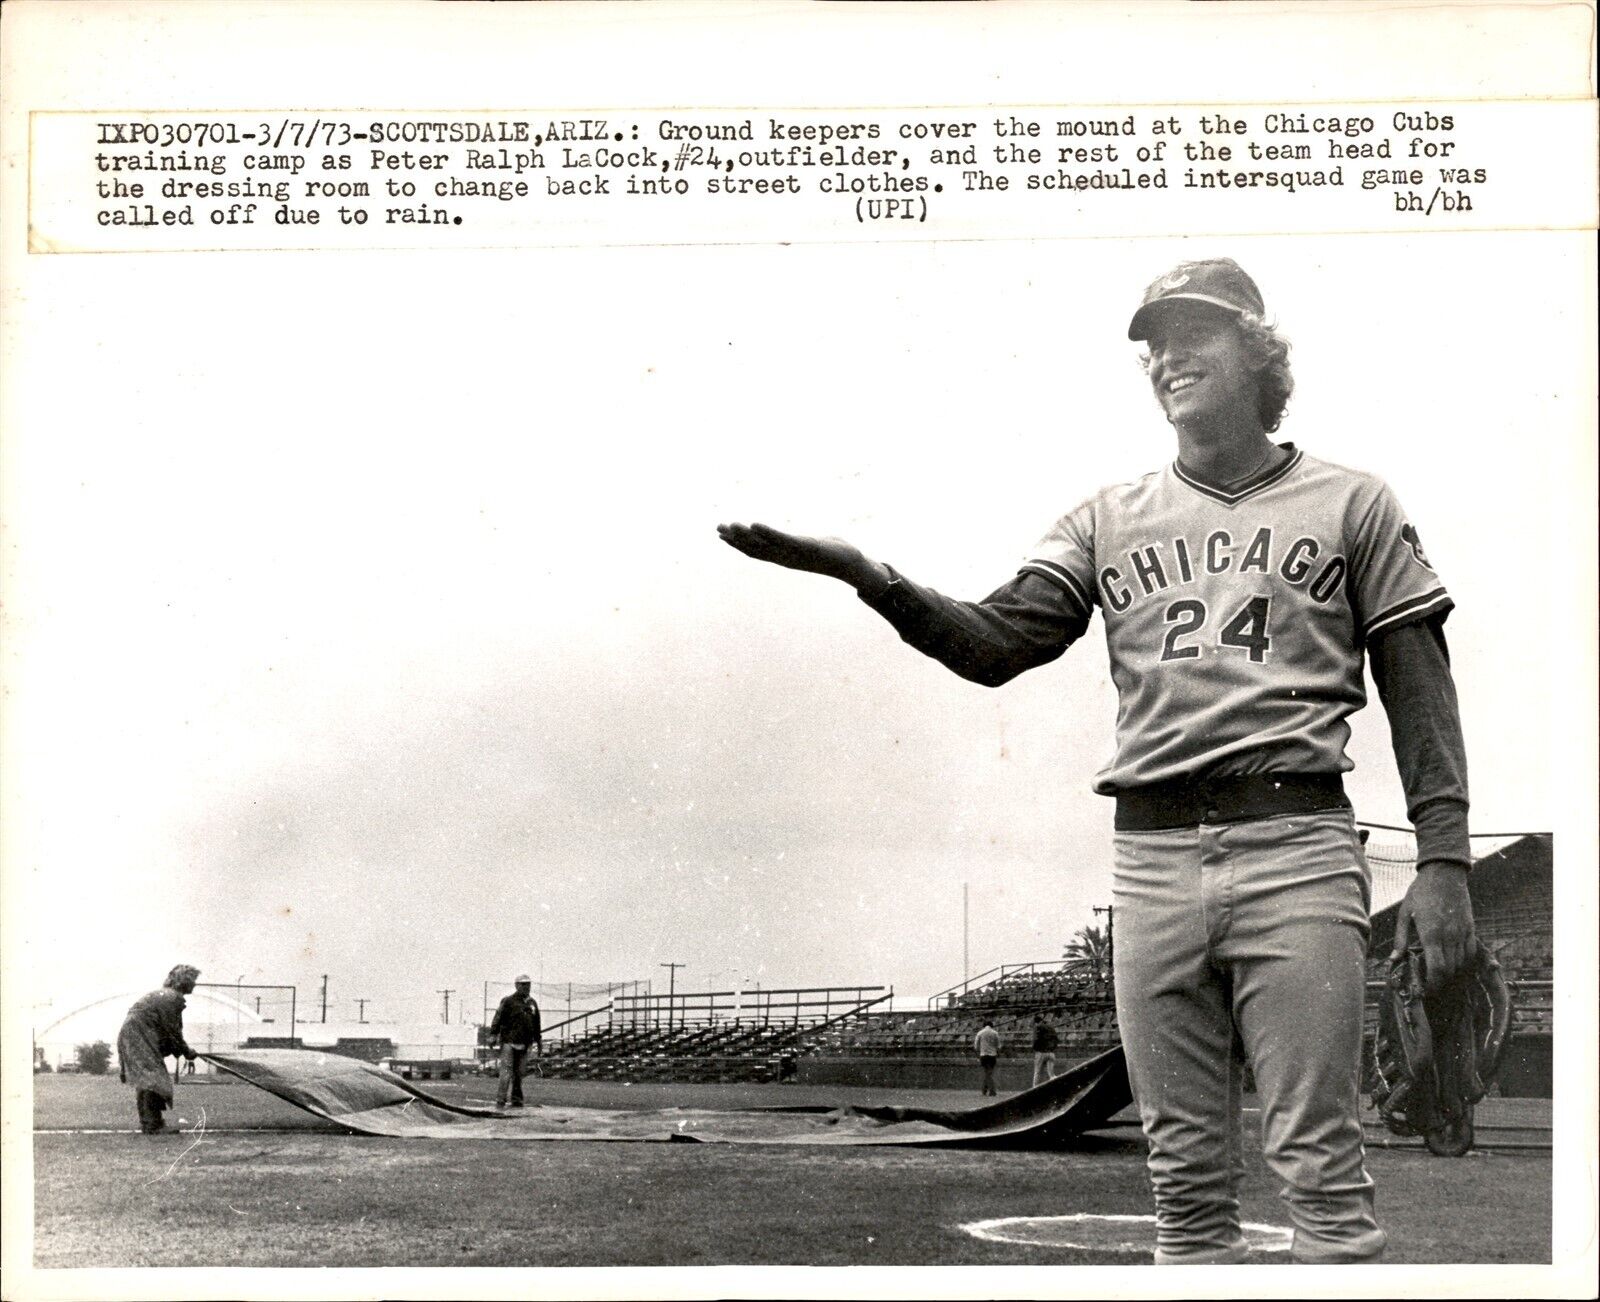 LD250 1973 Orig Bill Hormell Photo CHICAGO CUBS TRAINING CAMP RAIN PETE LACOCK